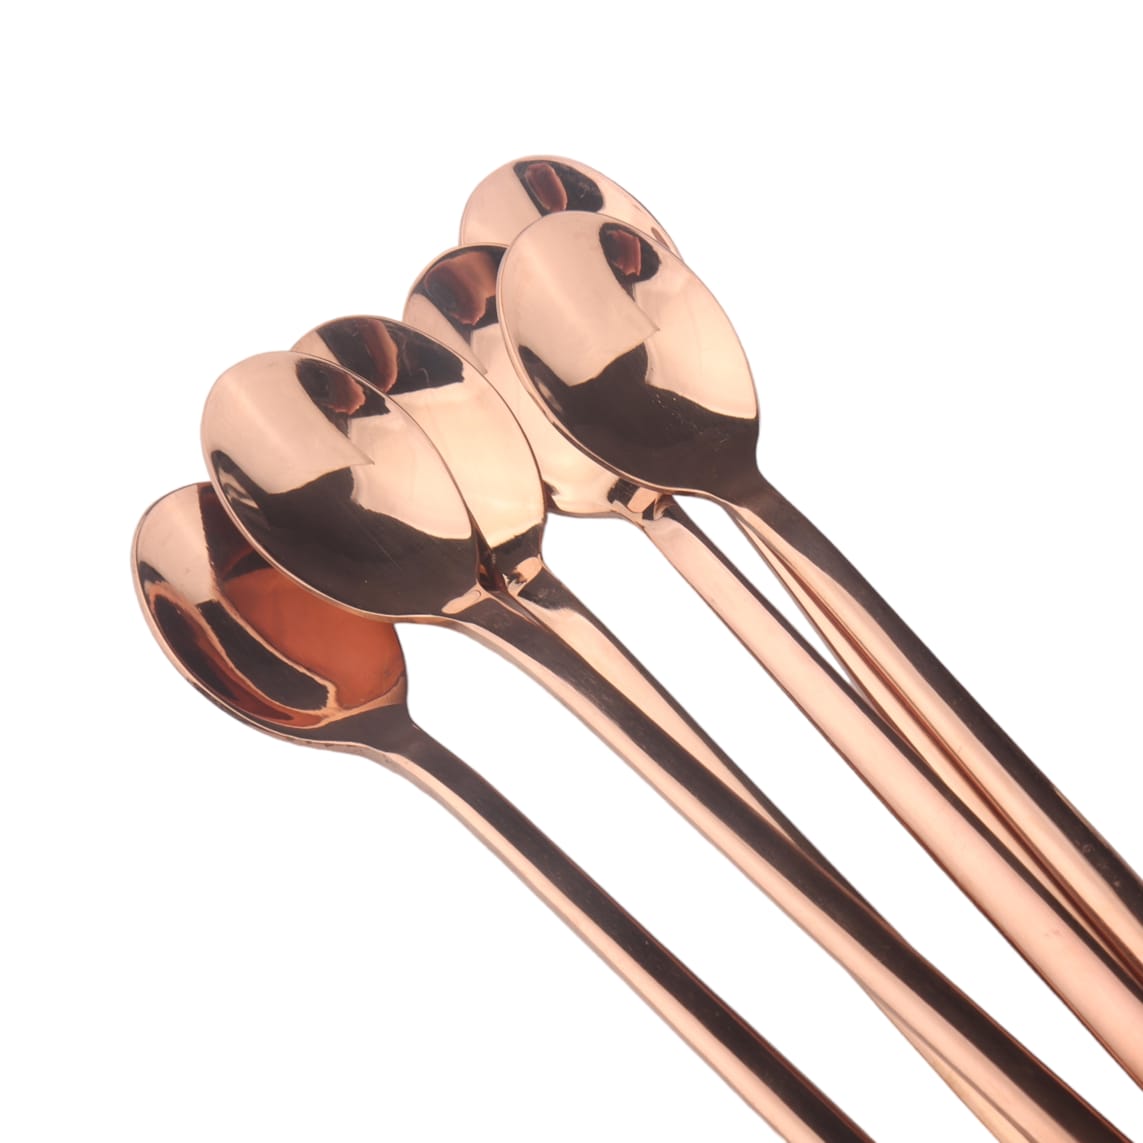 Stainless Steel Soda Spoon 6Pcs Rose Gold Square Handle Colour